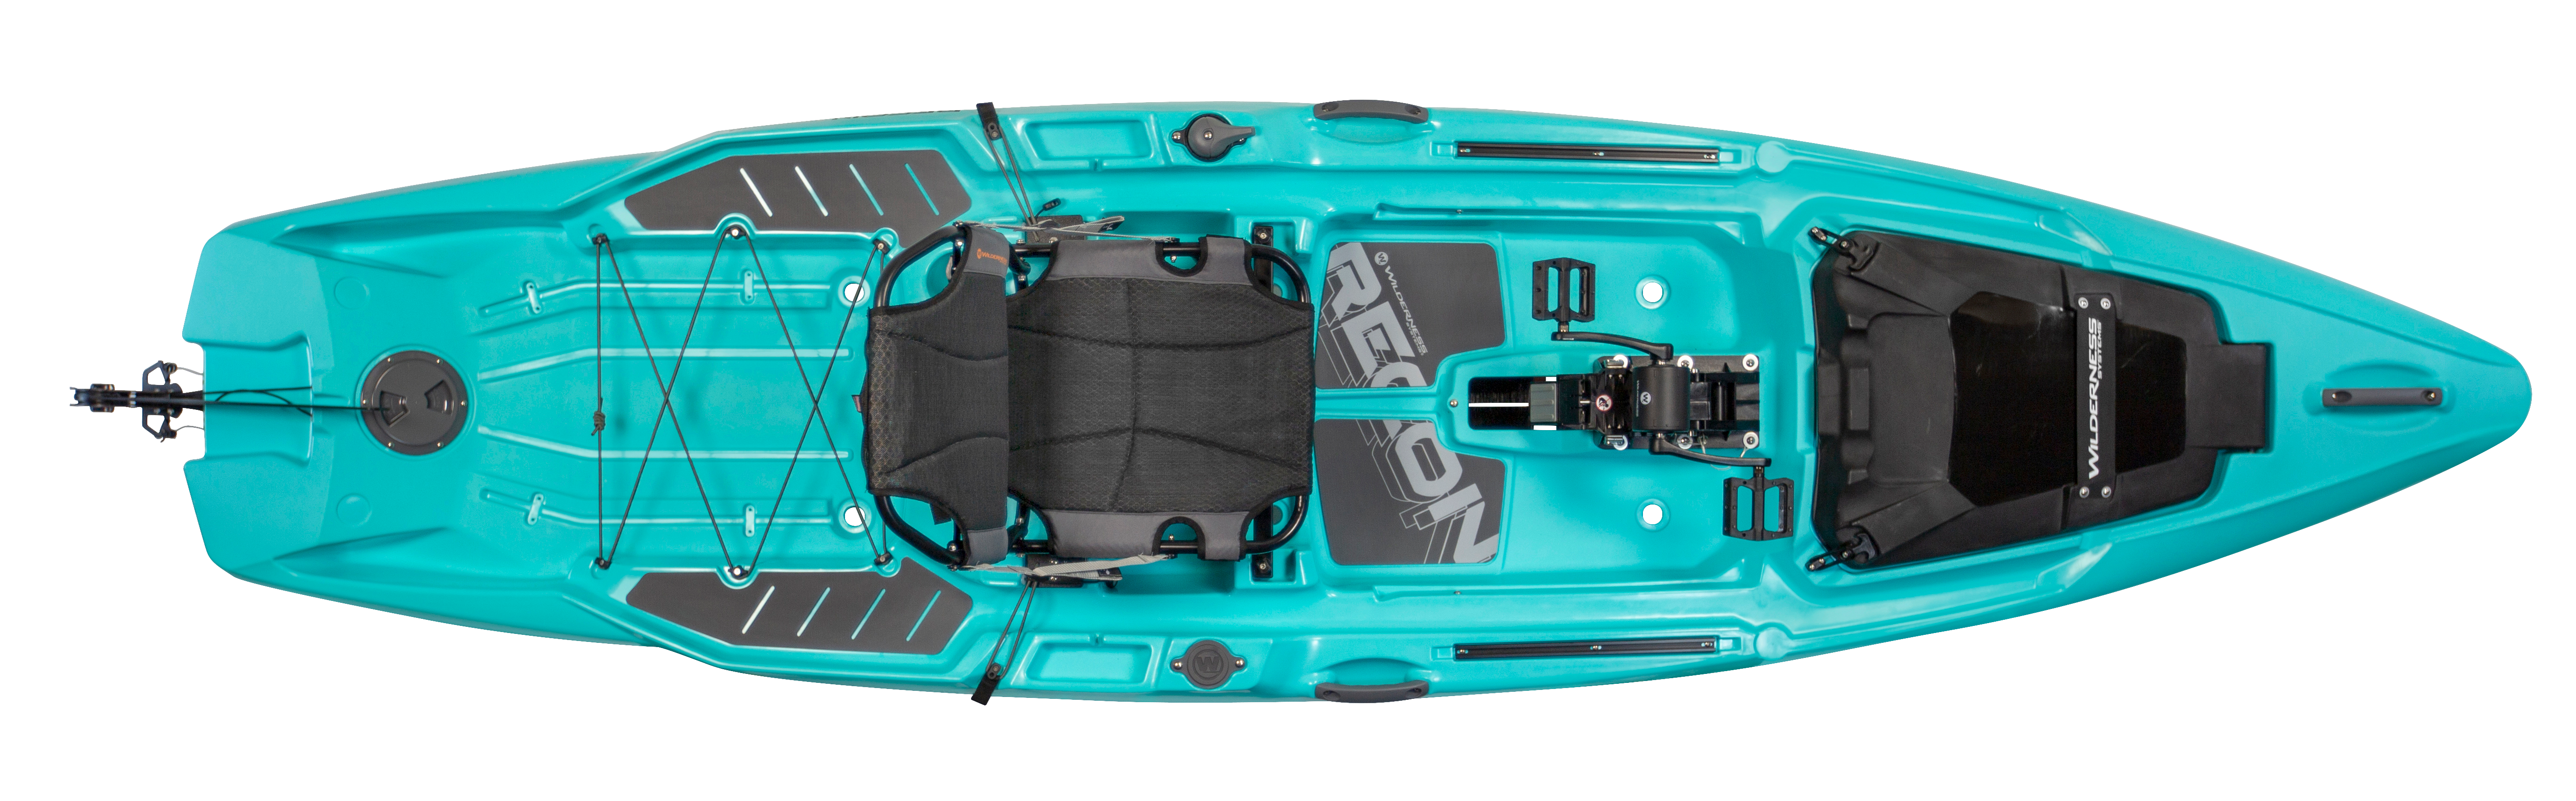 Wilderness Systems Recon 120 HD Kayak in Aqua